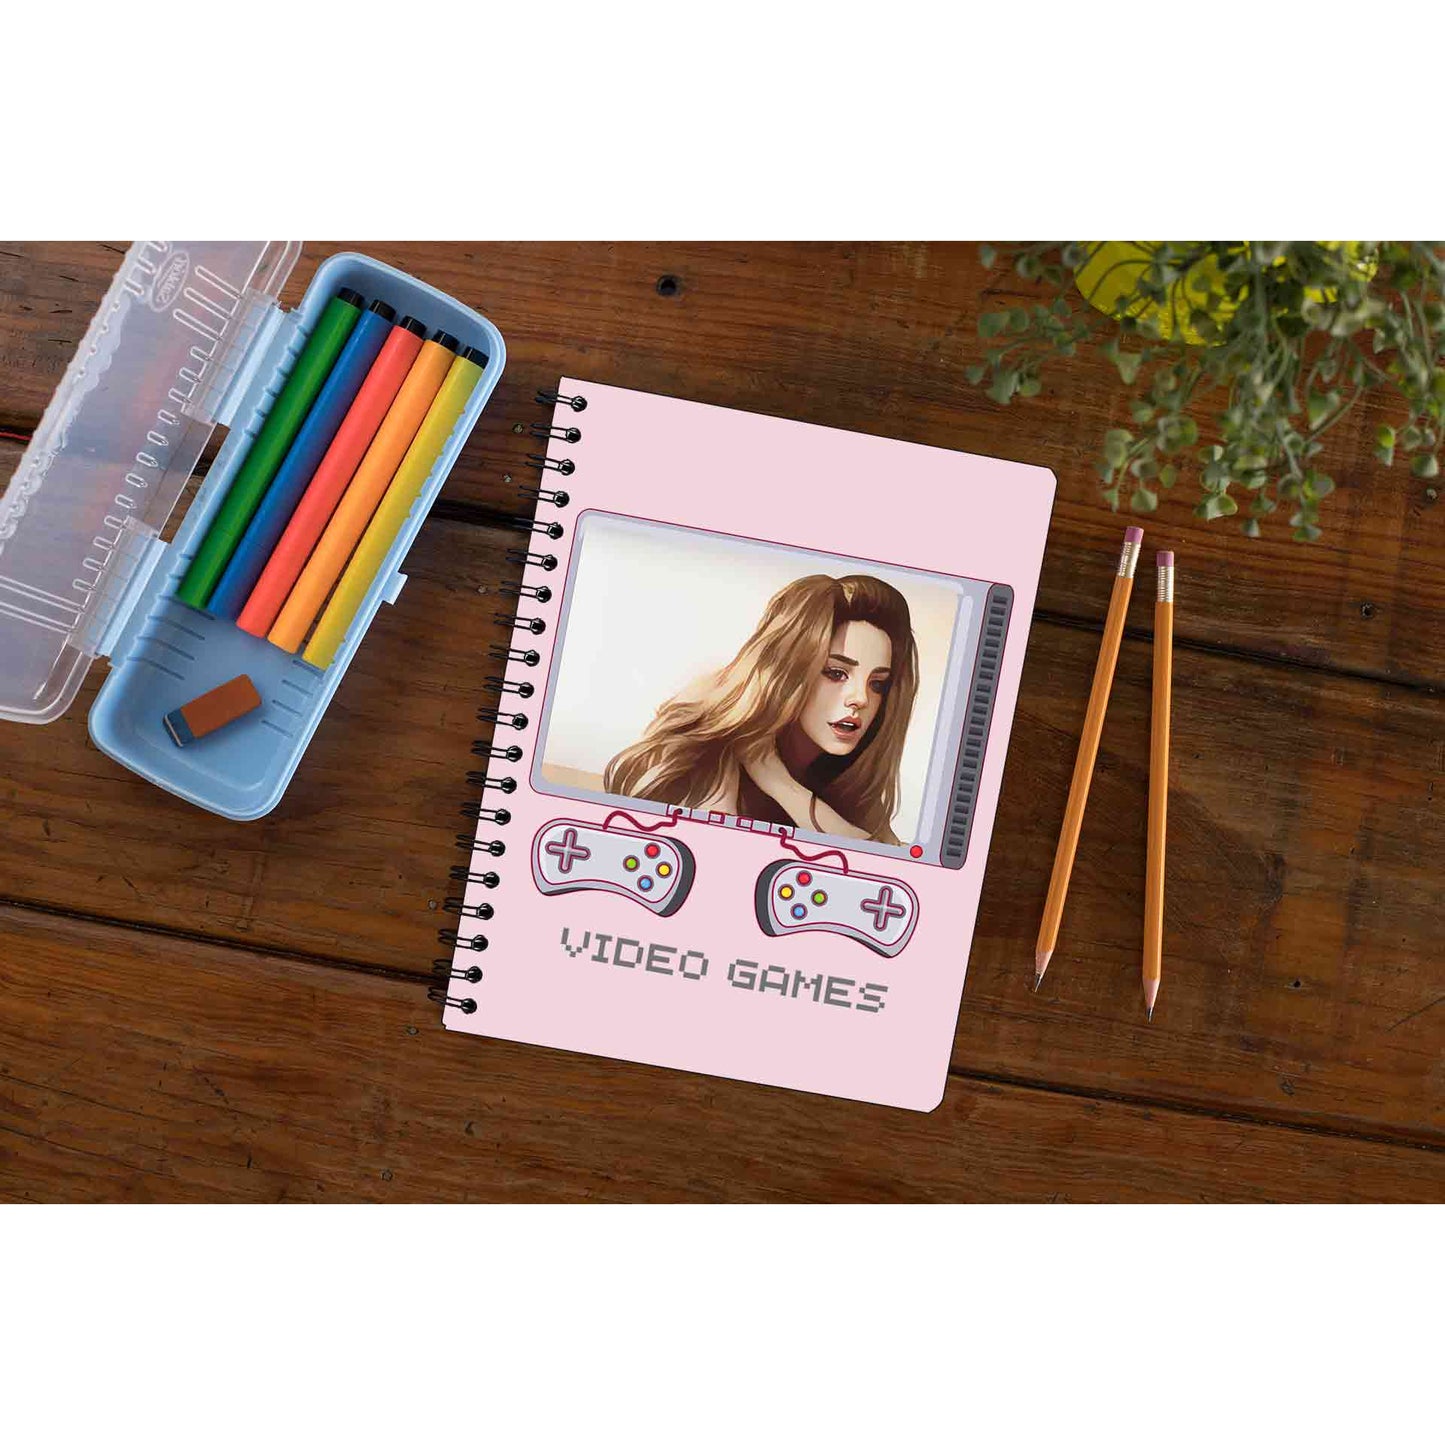 lana del rey video games notebook notepad diary buy online india the banyan tee tbt unruled 